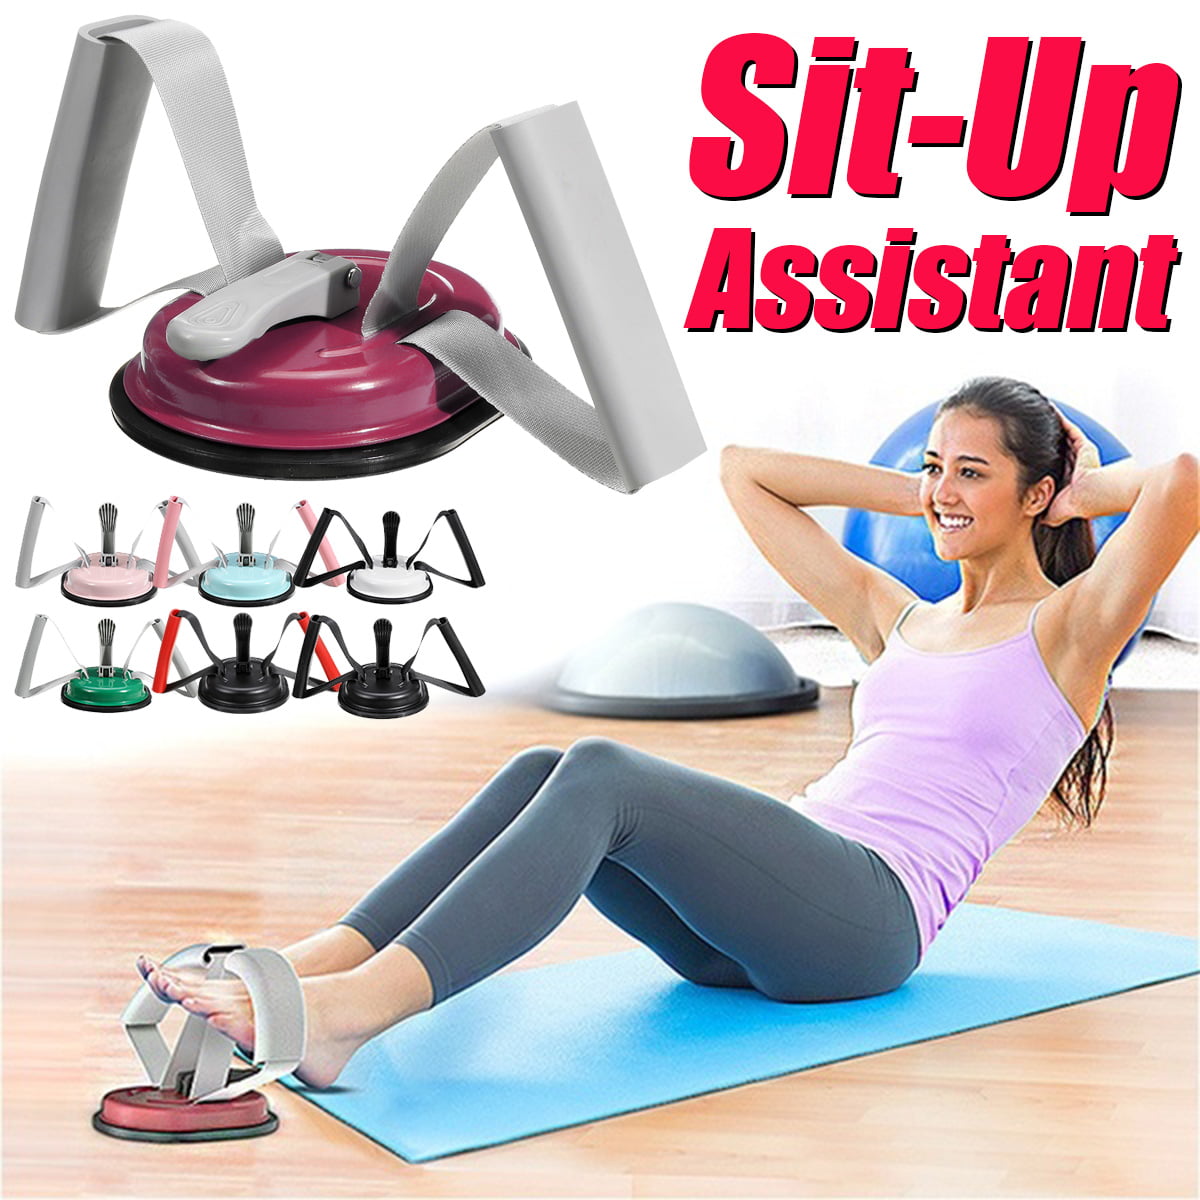 Stomach Muscles Toner & Guides Crivit Abdominal Trainer Ab Trimmer Exerciser 